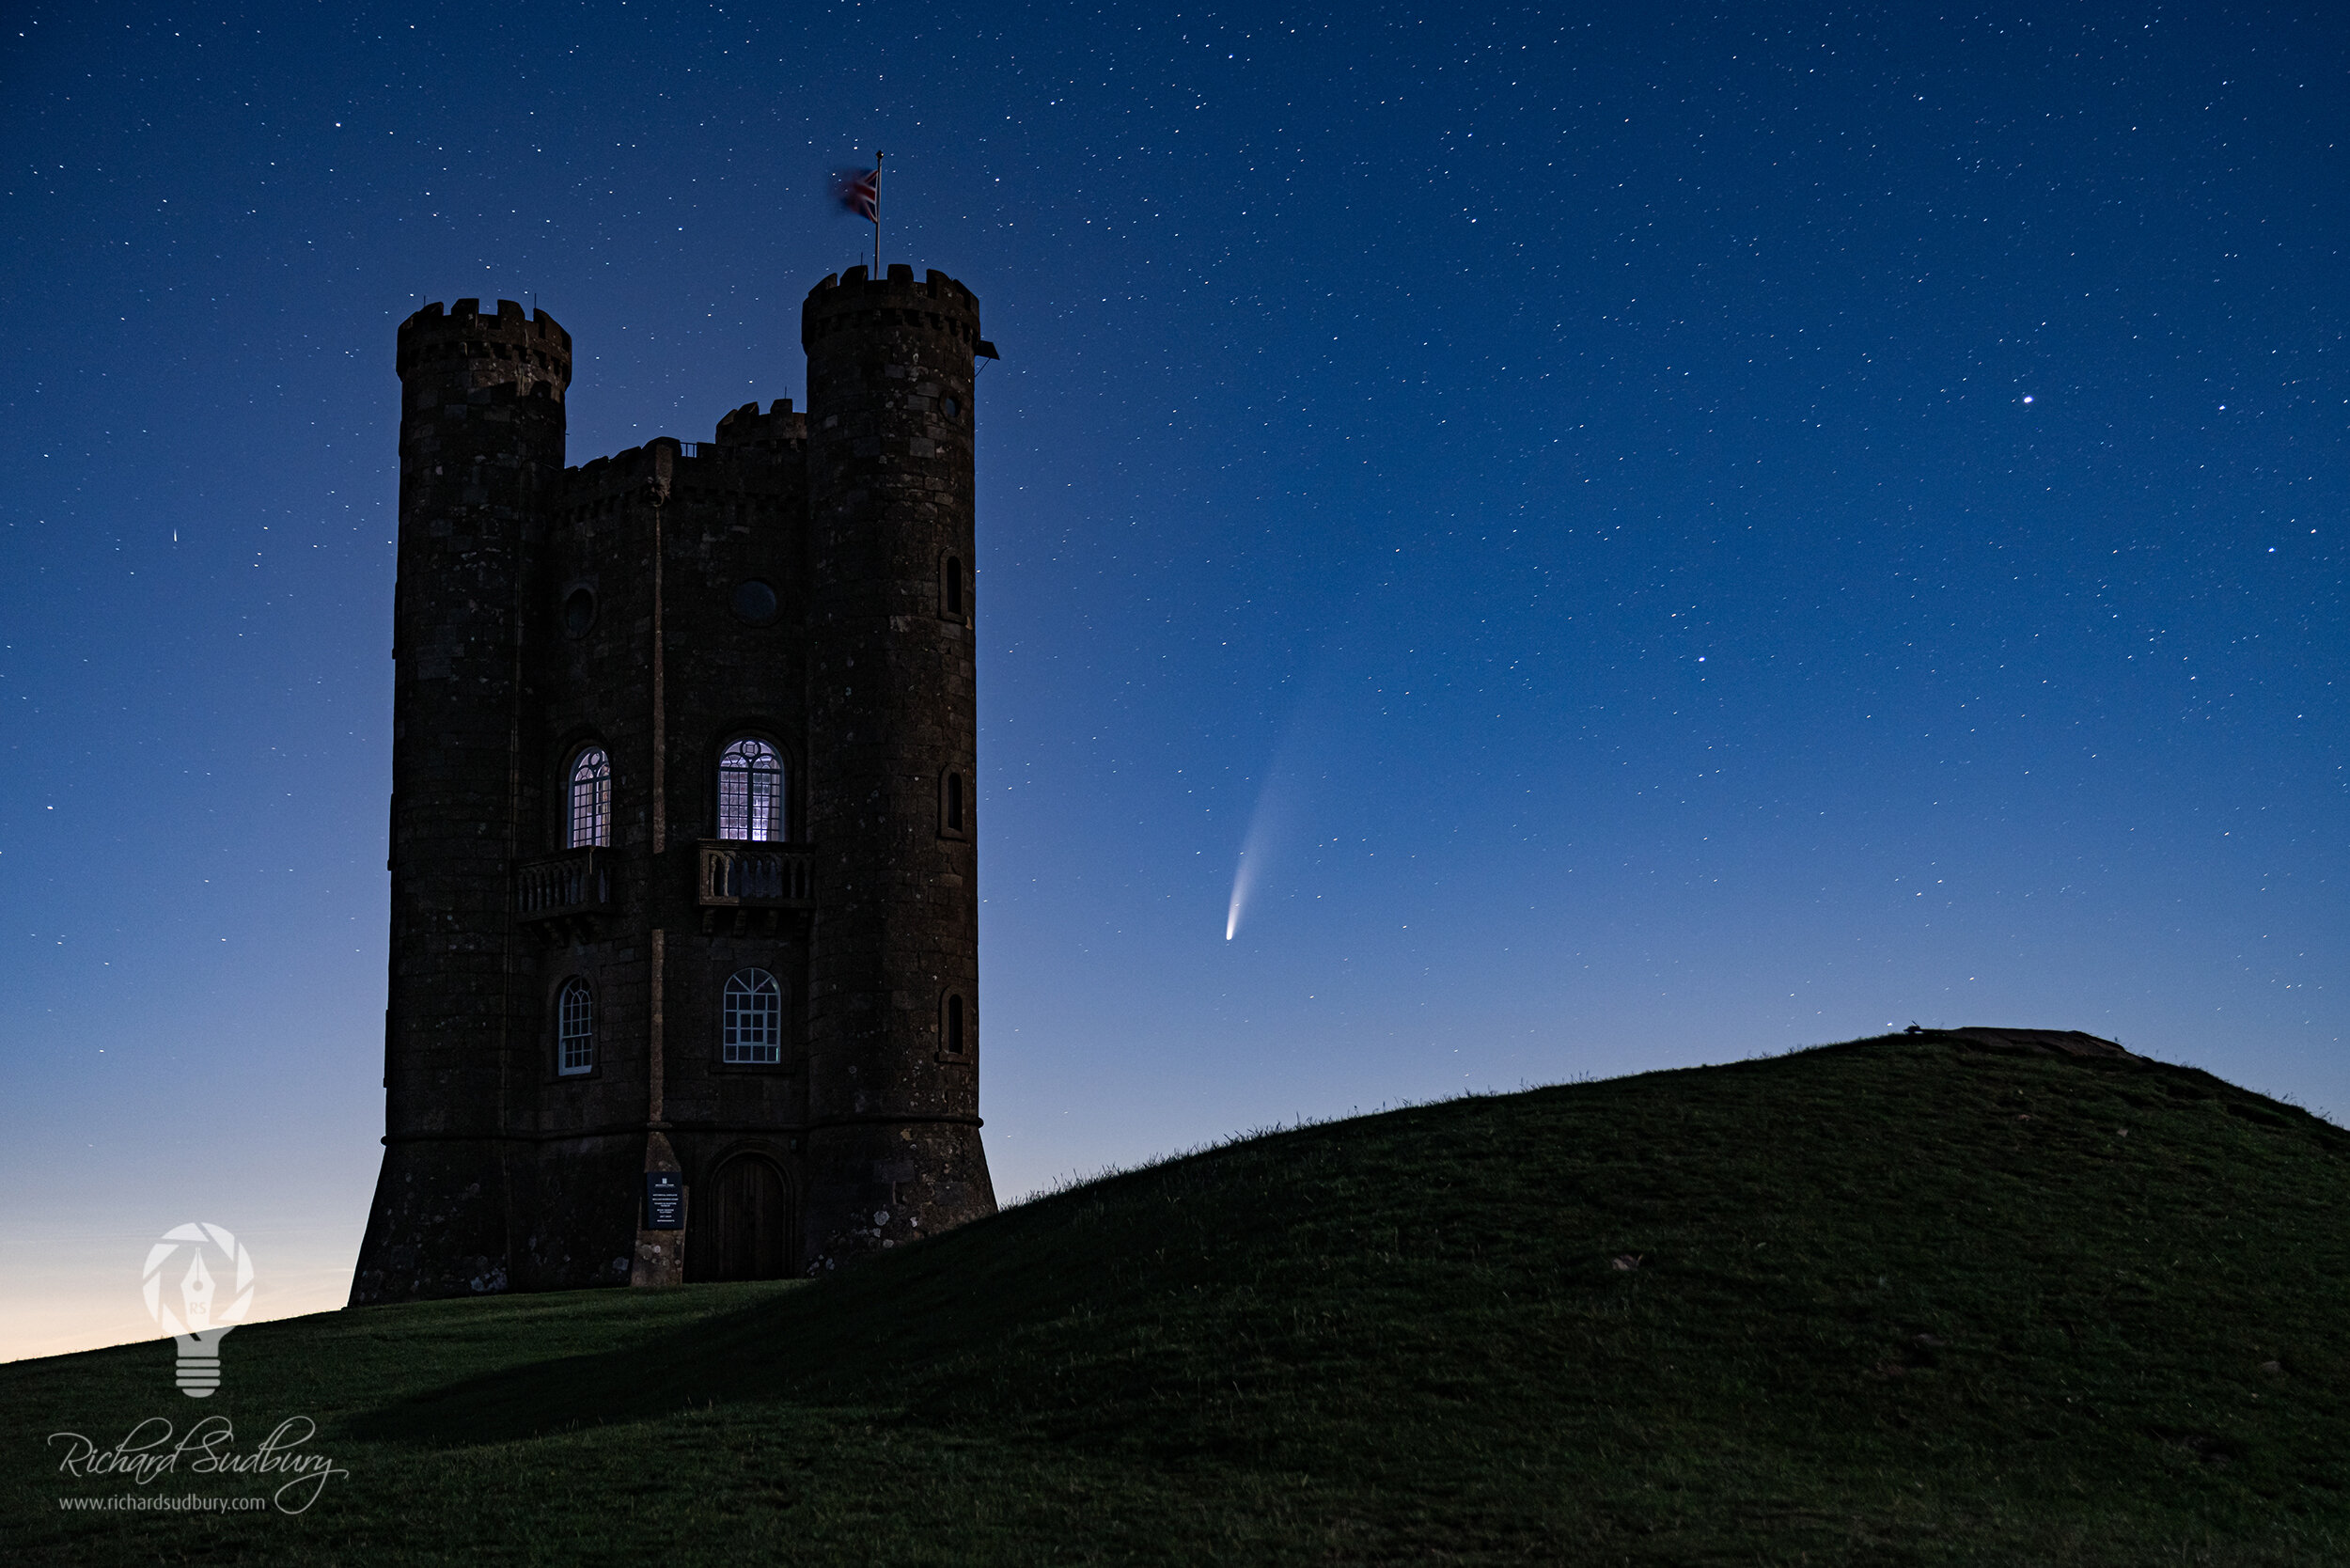 Comet Neowise at Broadway Tower